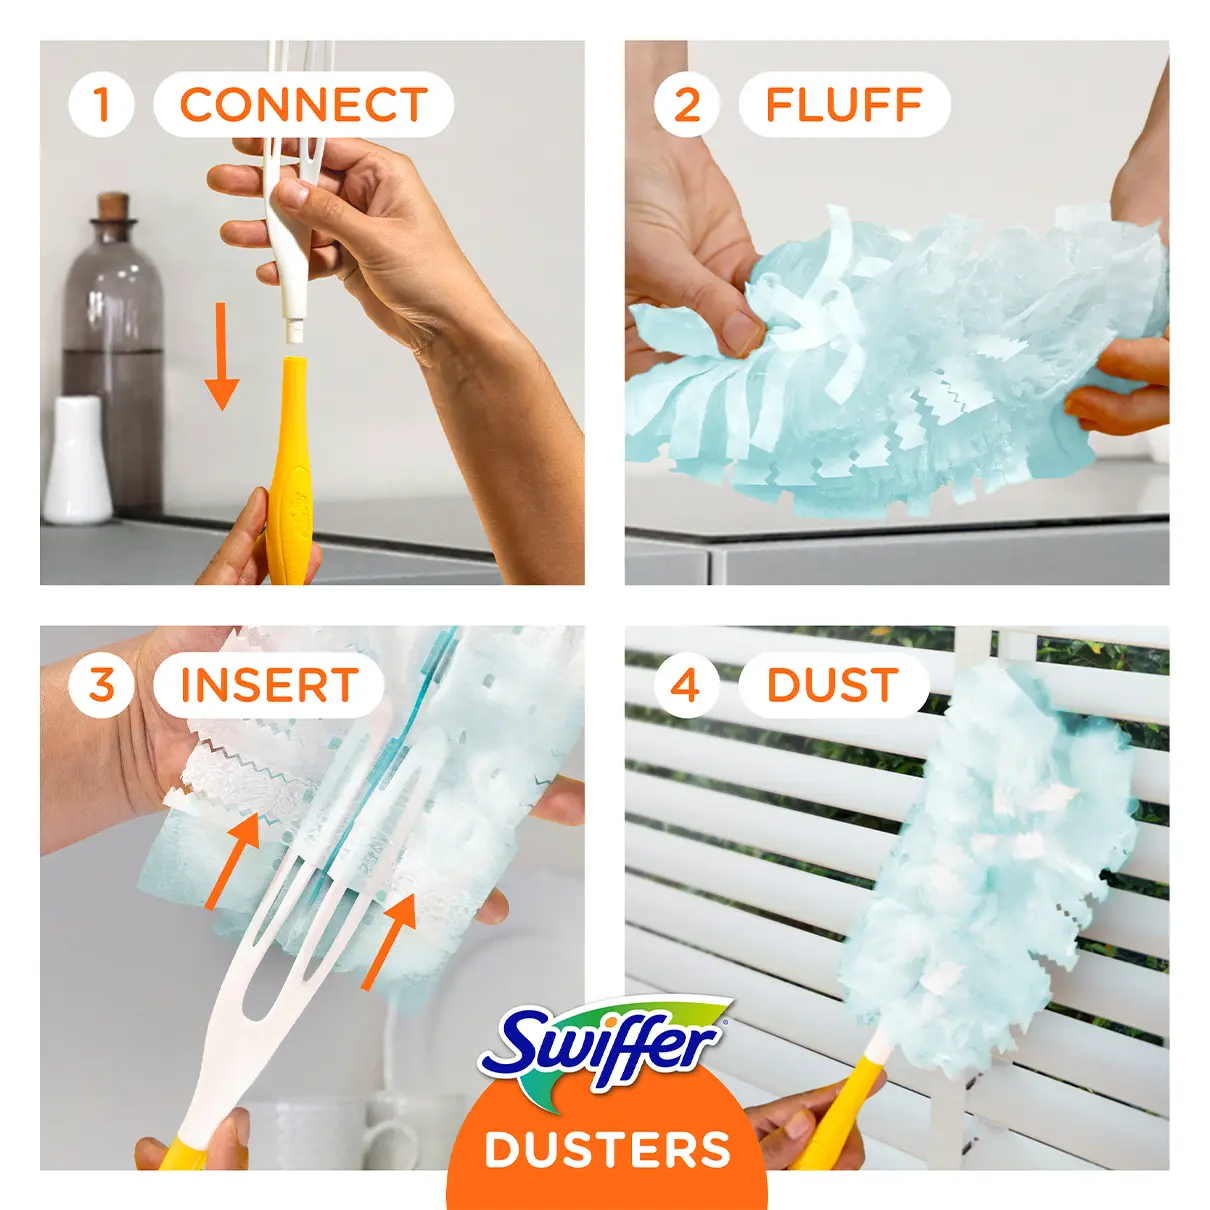 Swiffer Unscented Duster Kit 